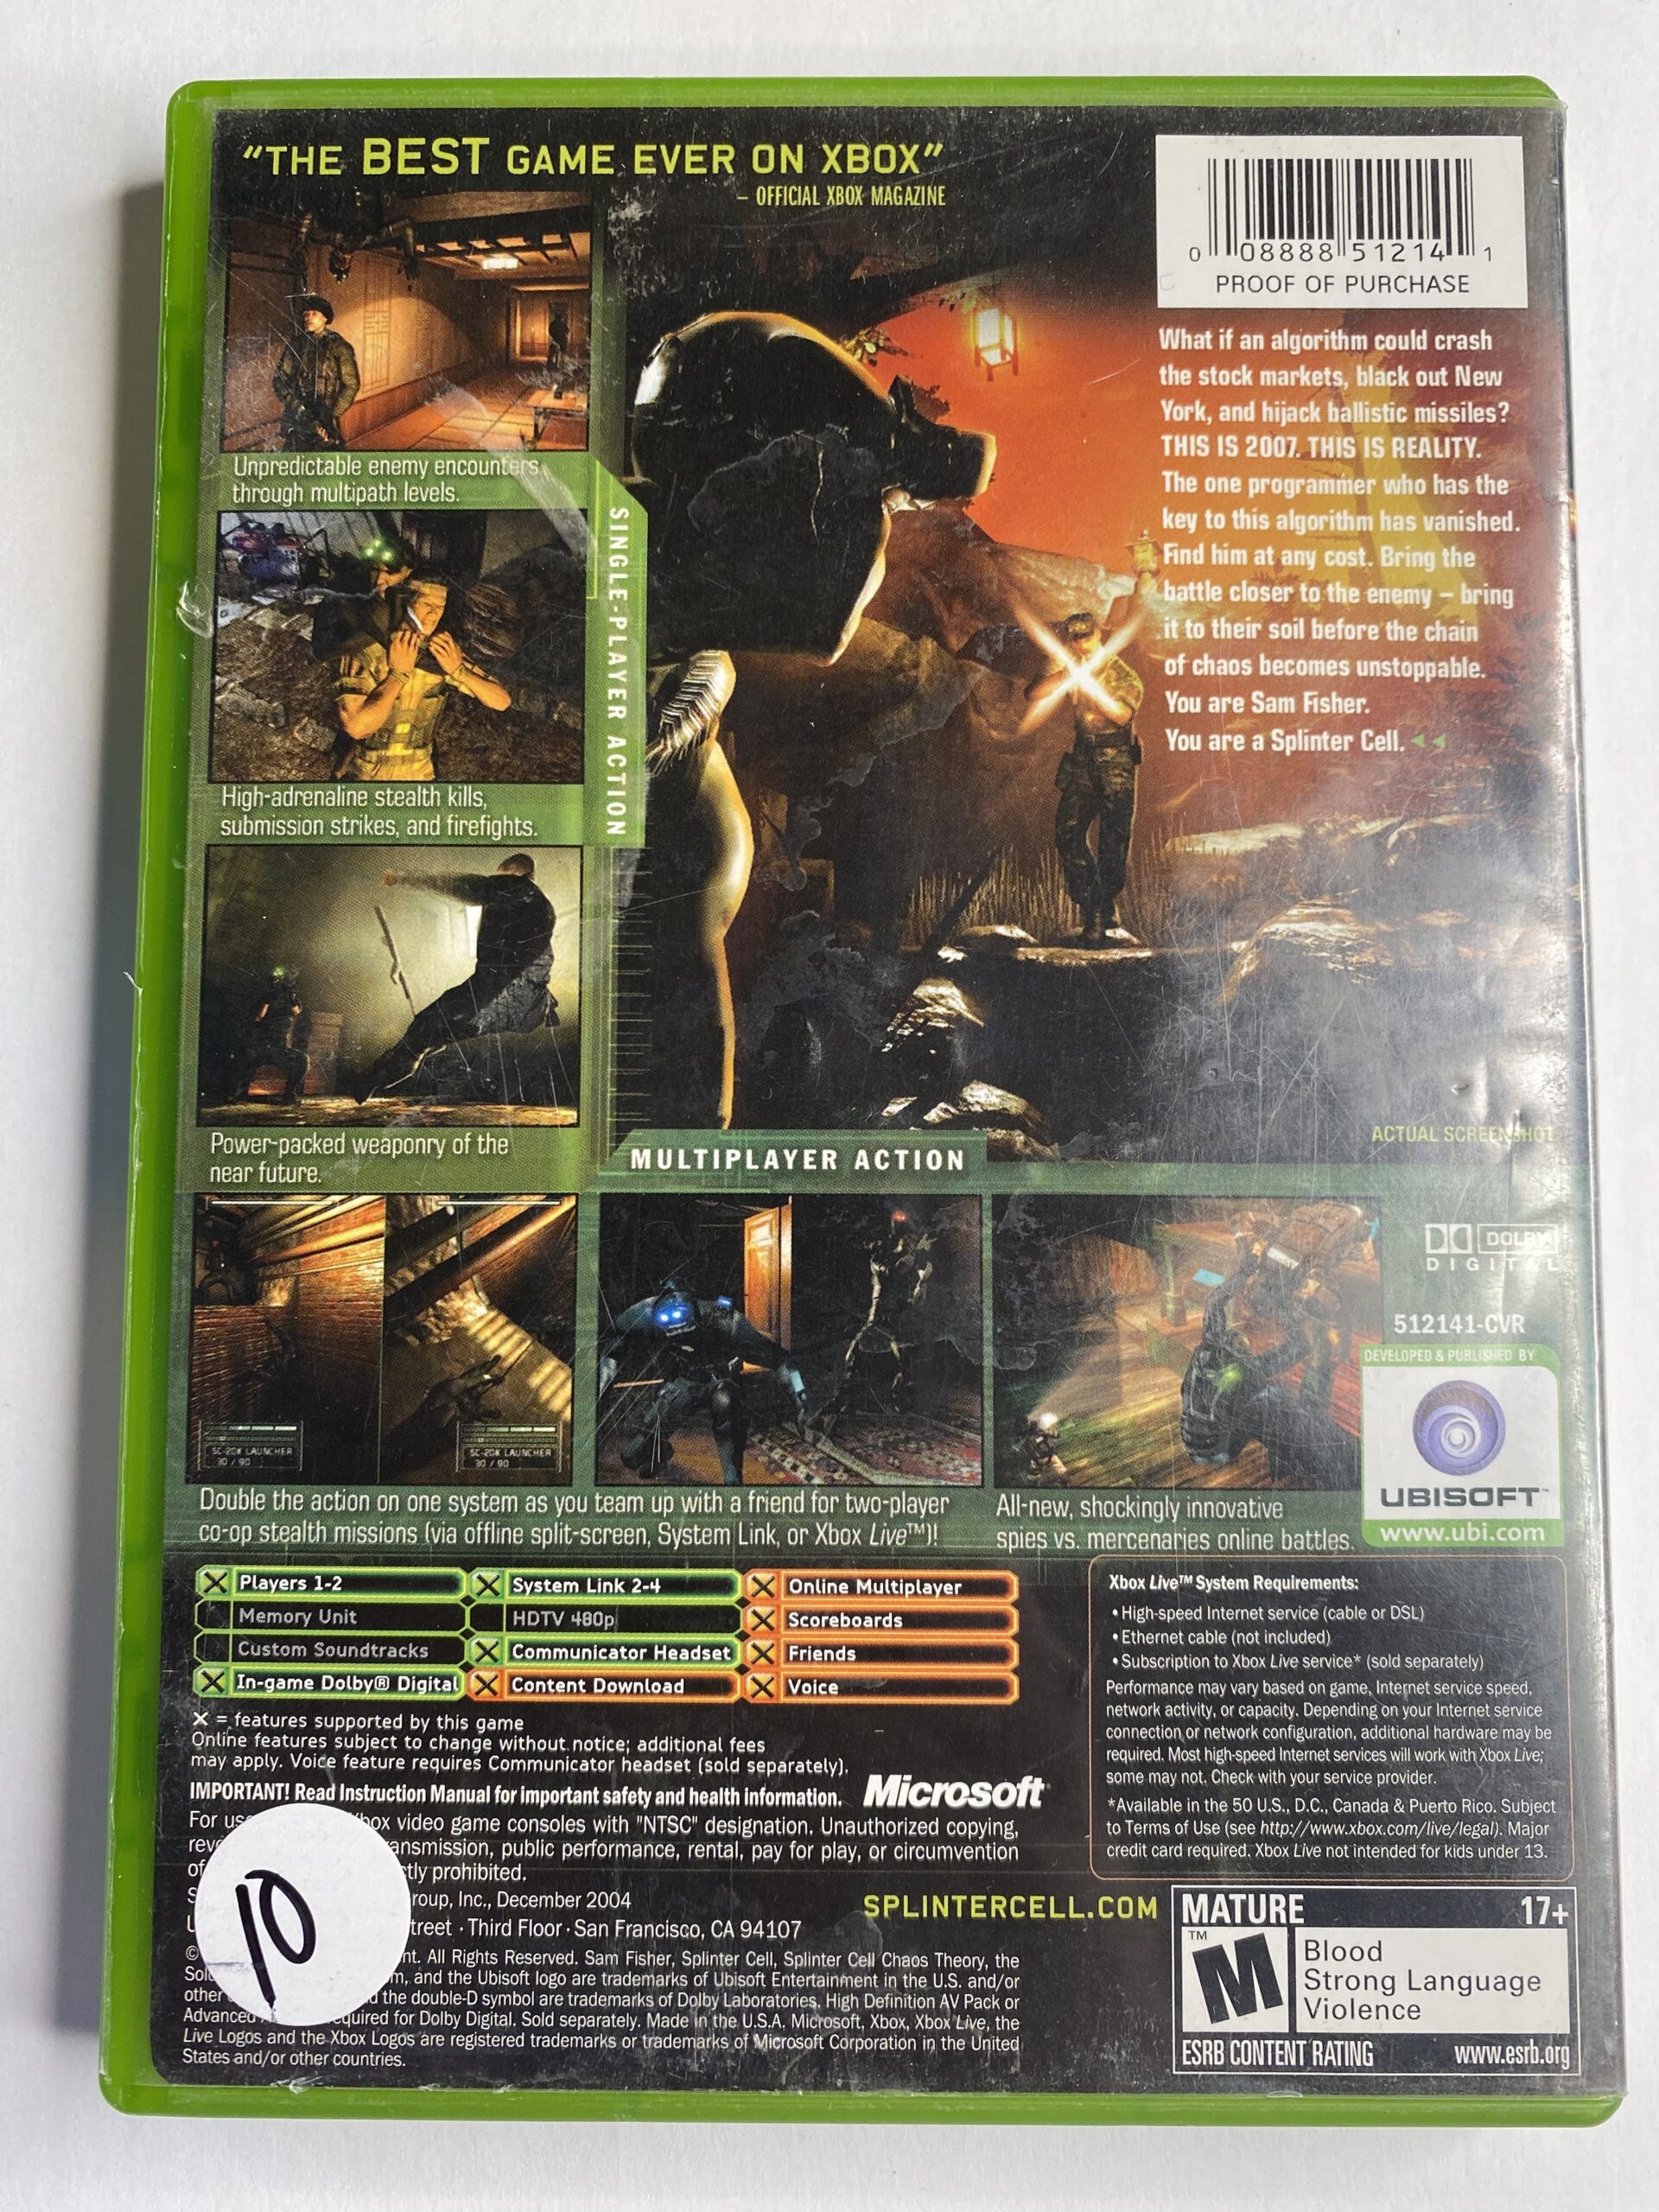 Splinter Cell: Chaos Theory – Arkham Alley